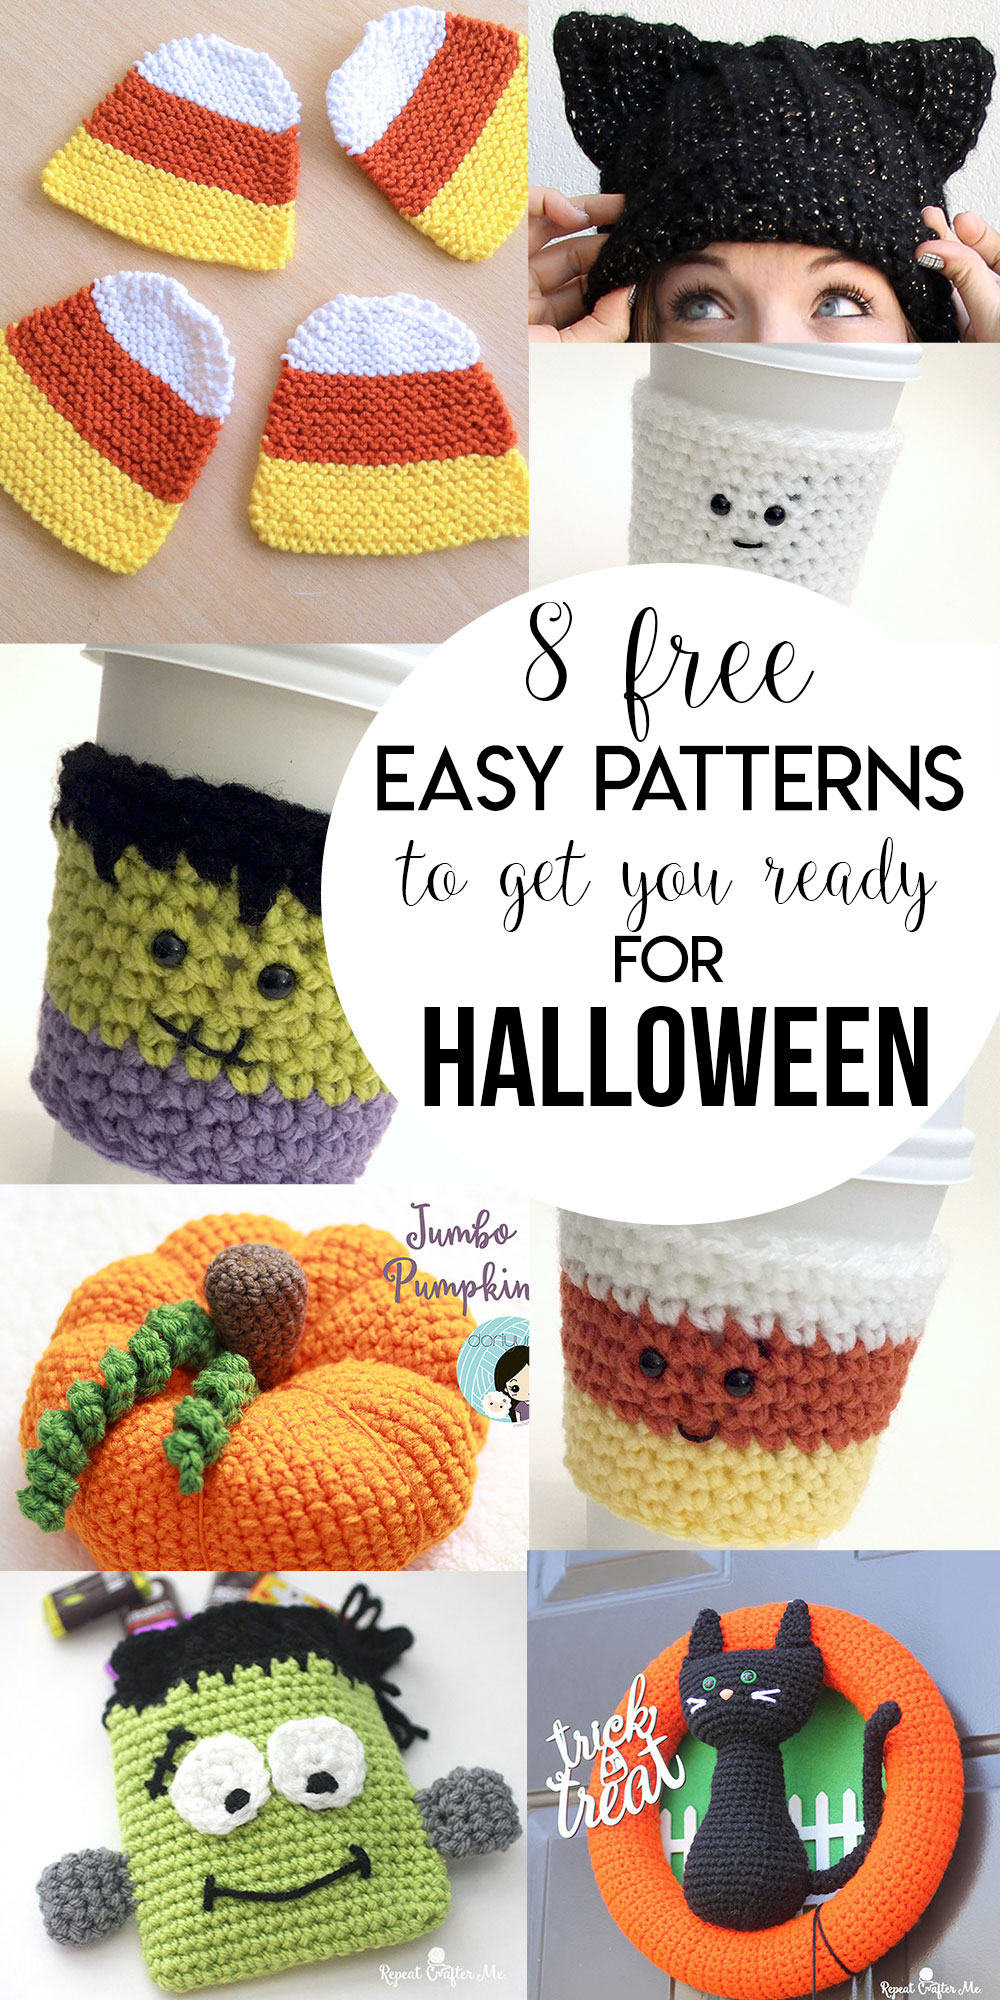 Halloween Crochet Patterns 8 Free Easy Patterns To Get You Ready For Halloween Just Be Crafty